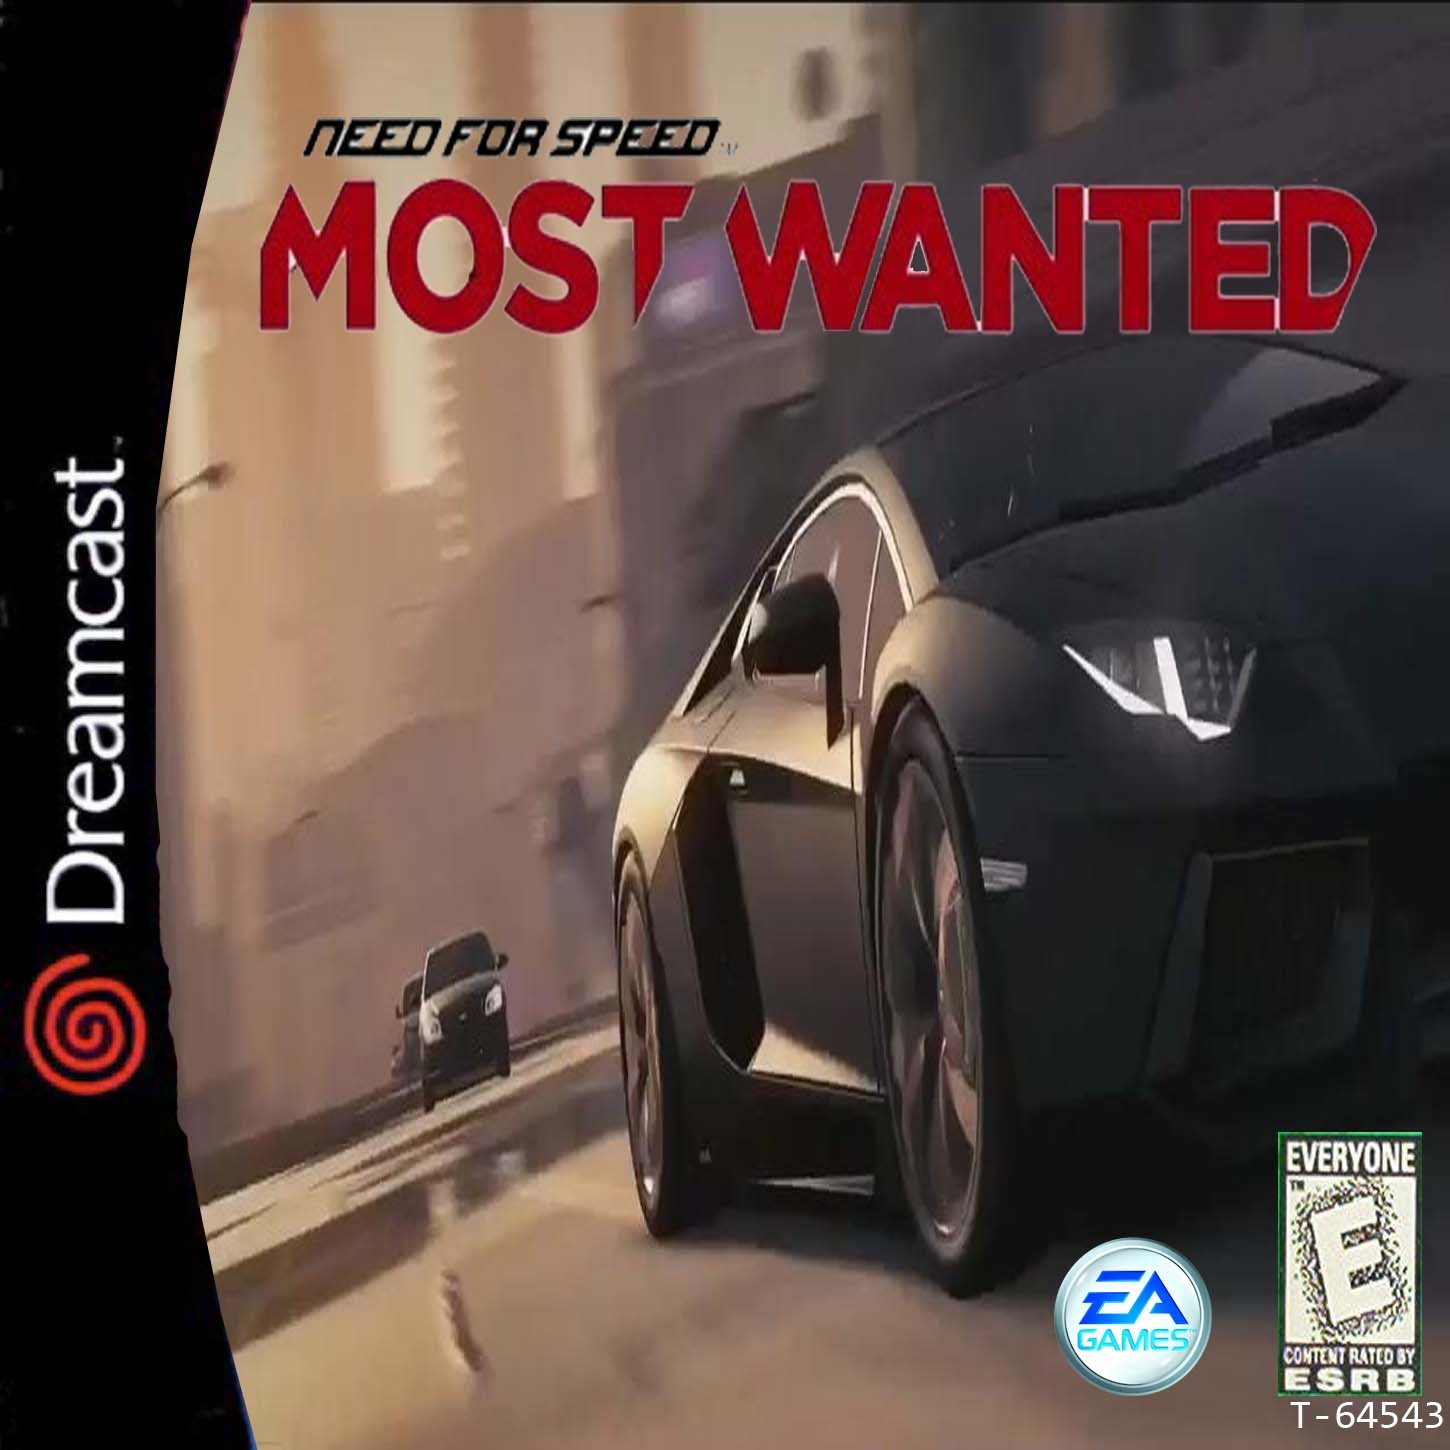 Need For Speed Most Wanted box cover